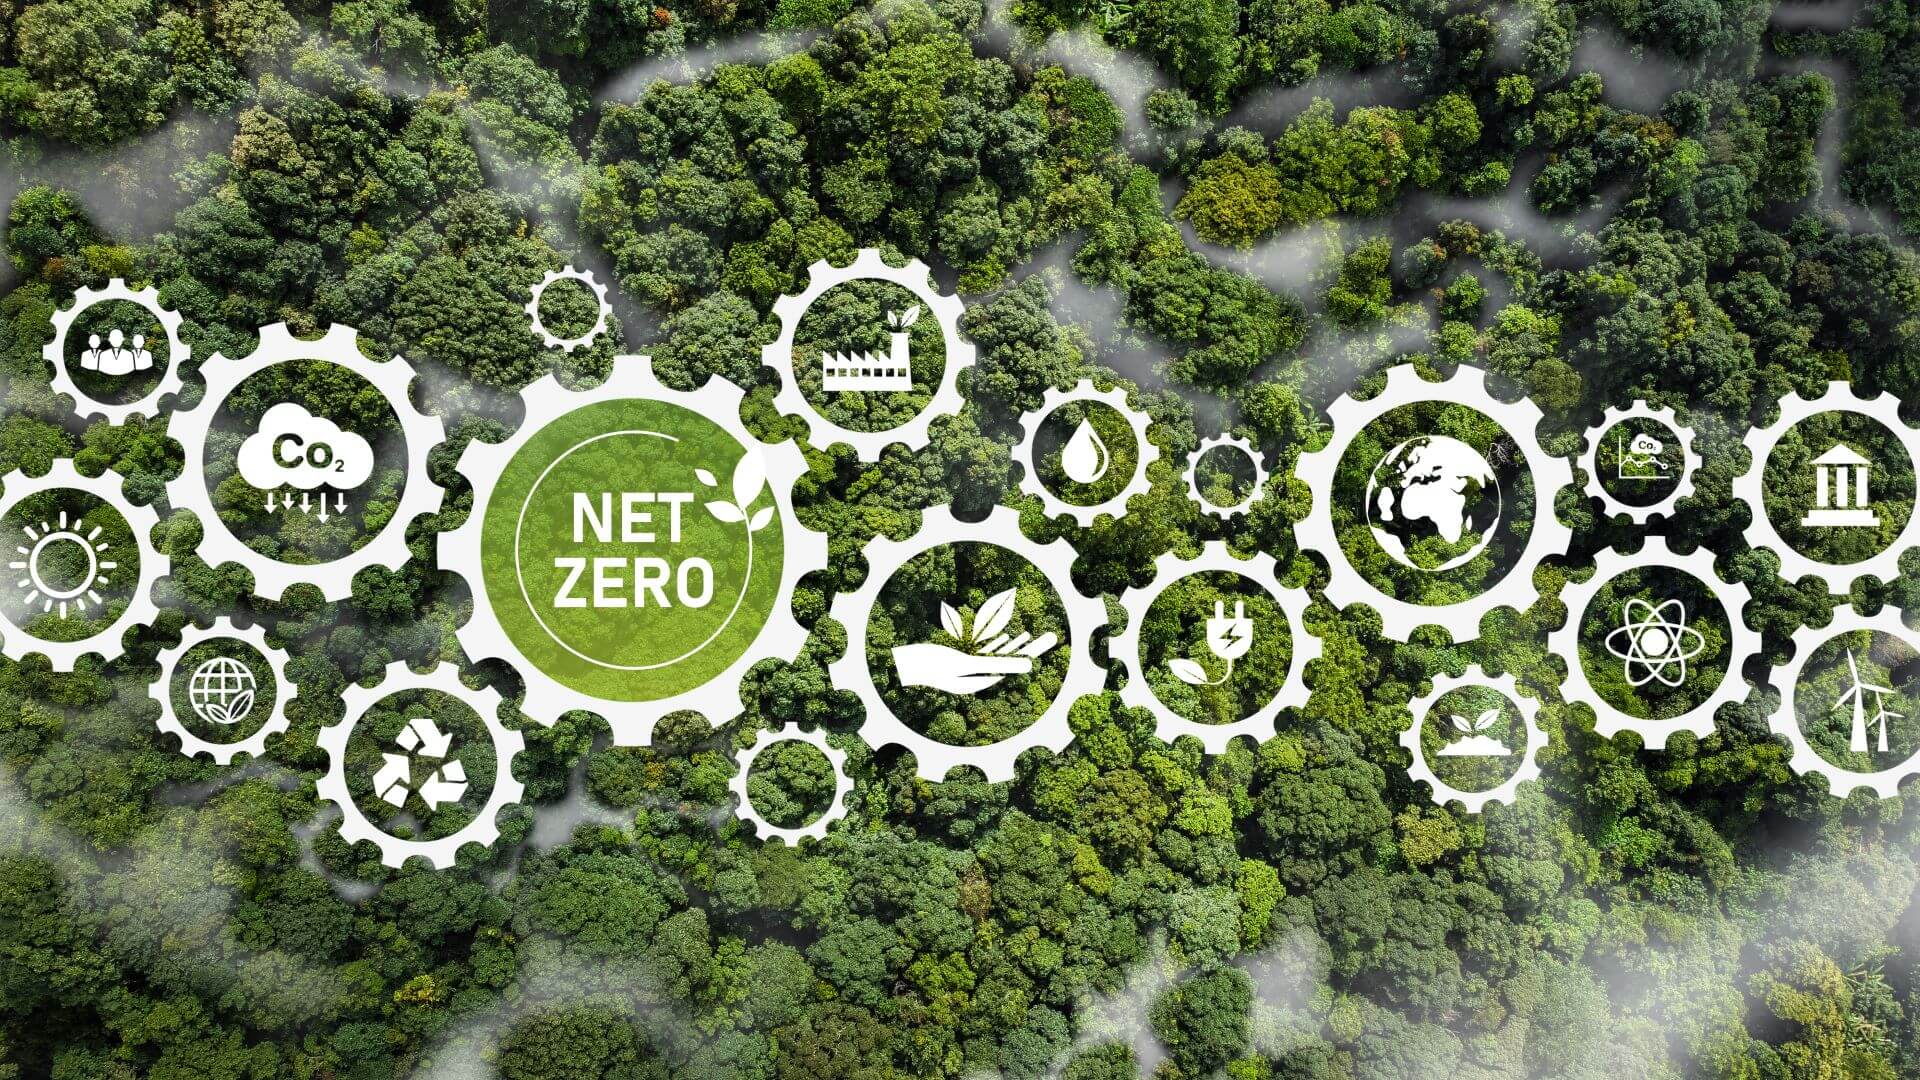 Graphic of cogs and gears depicting net zero over a green forest